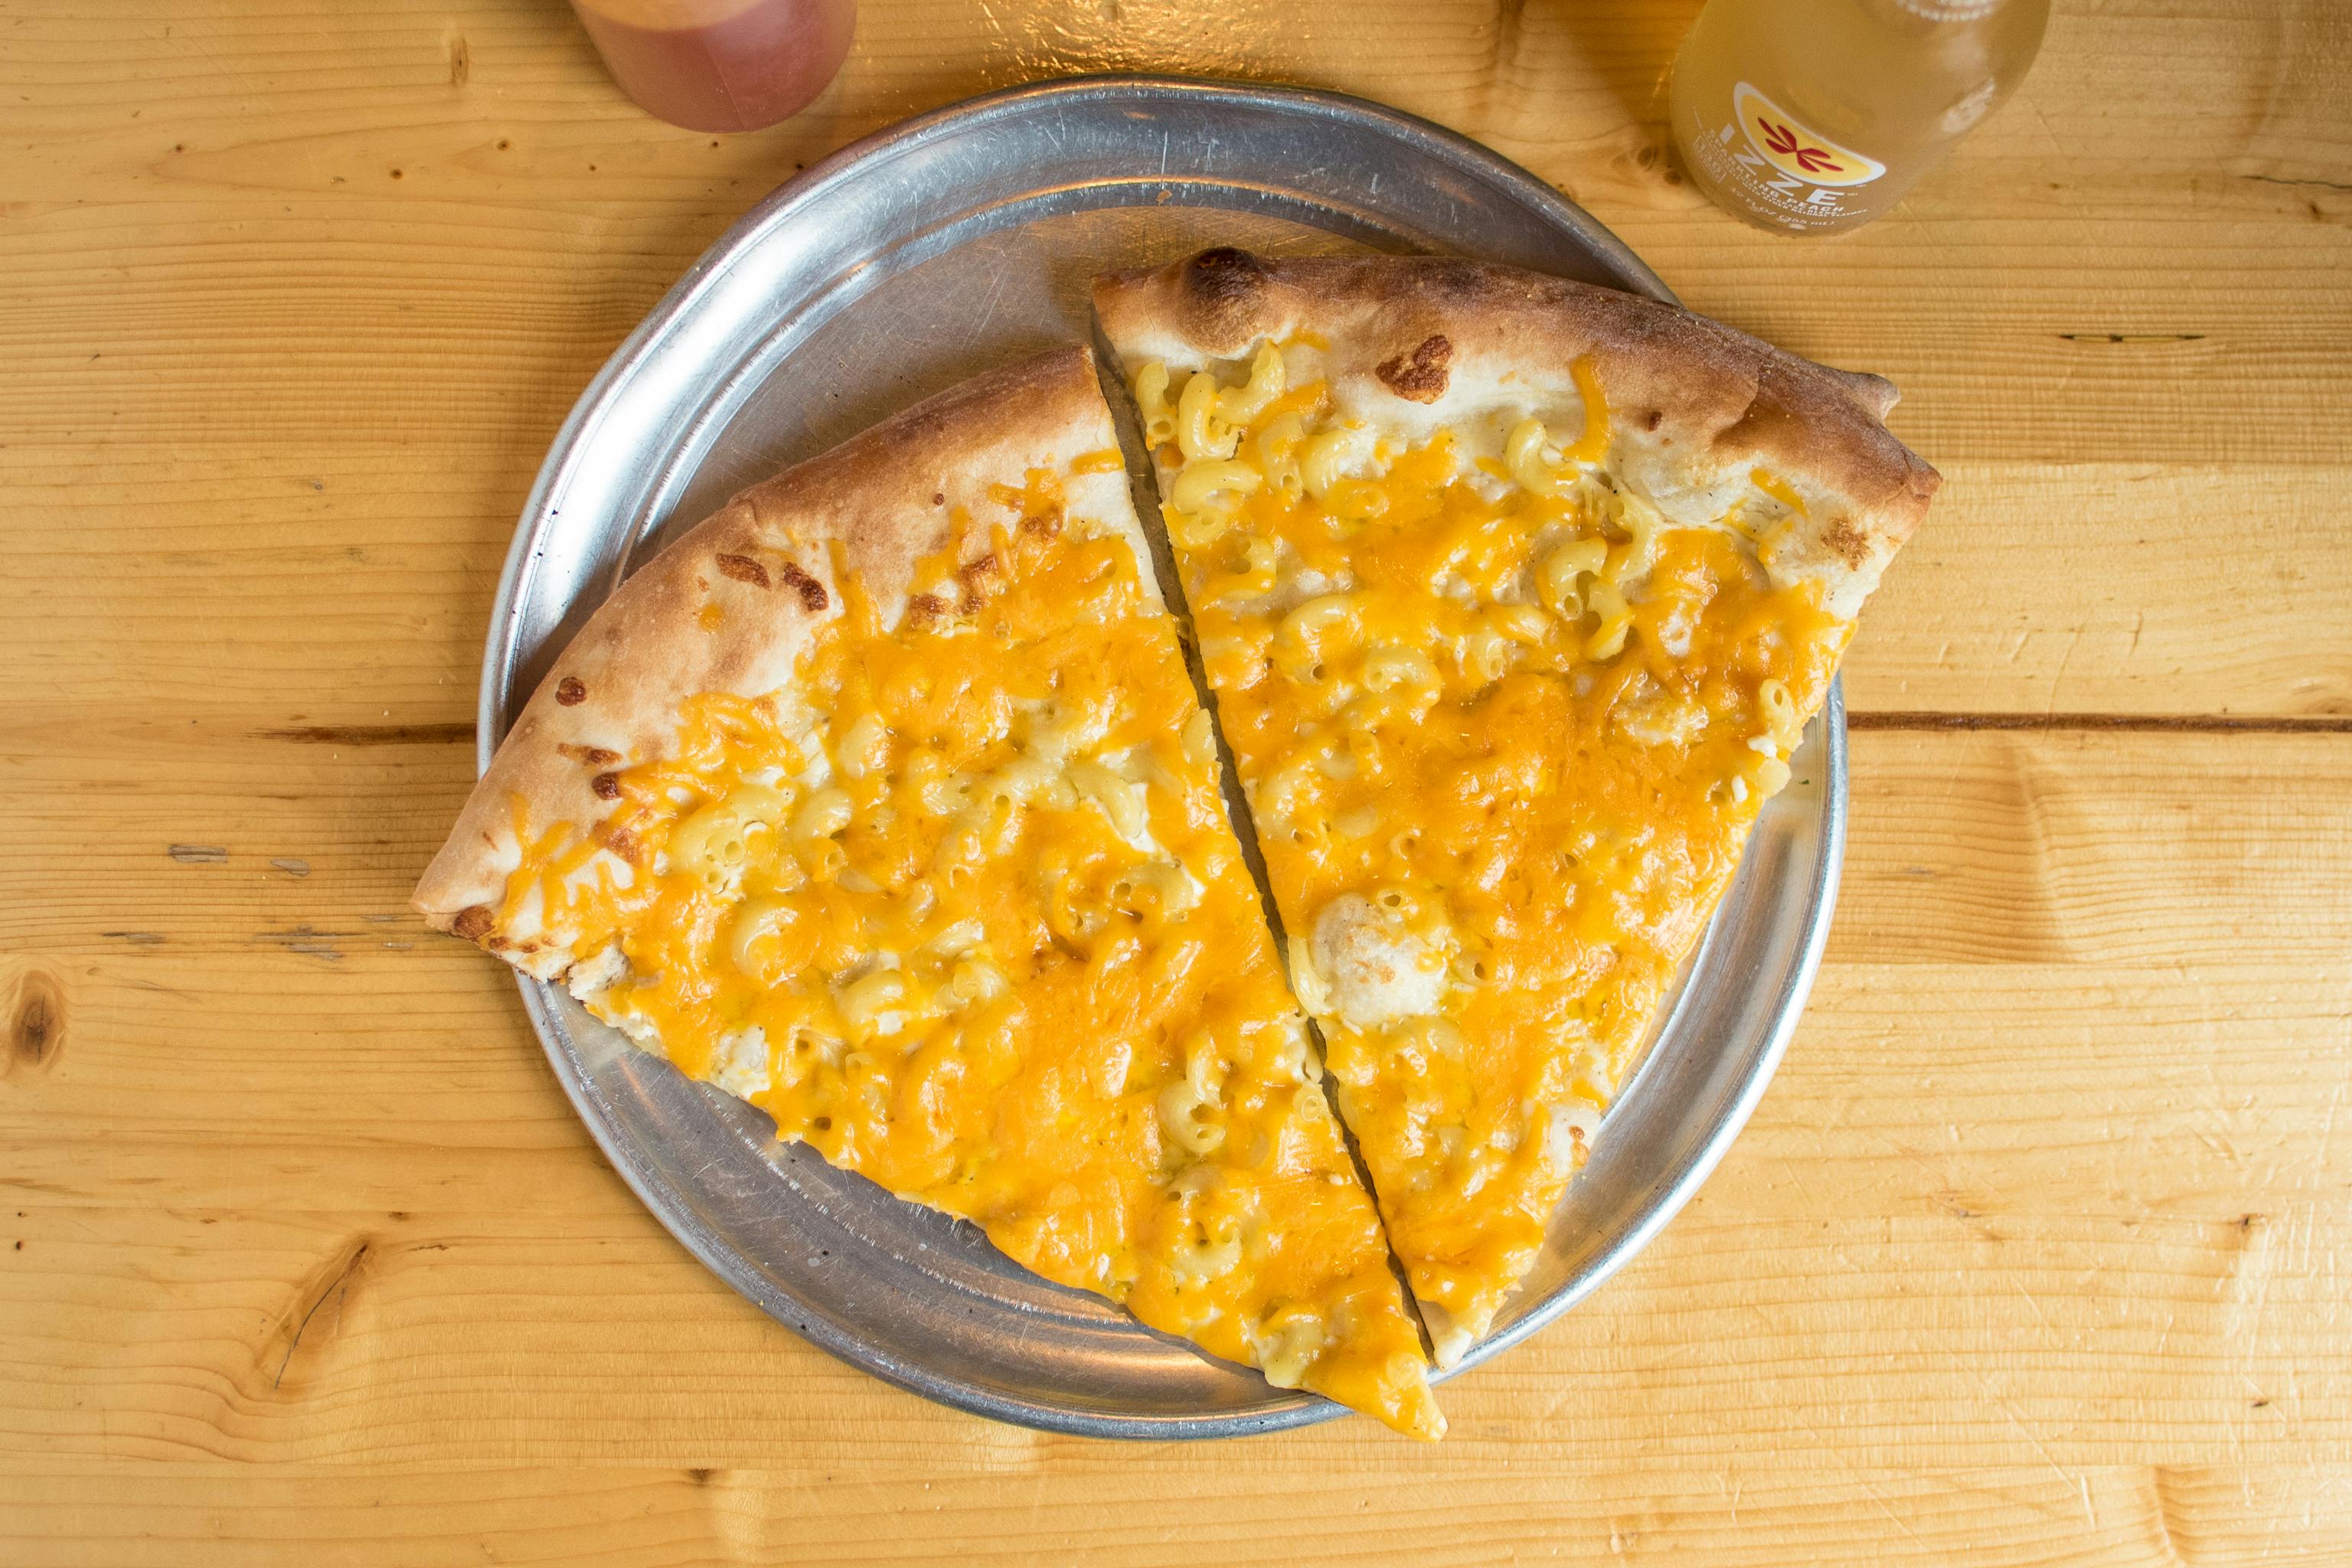 Mac n' Cheese Pizza from Ian's Pizza on State (Downtown) in Madison, WI